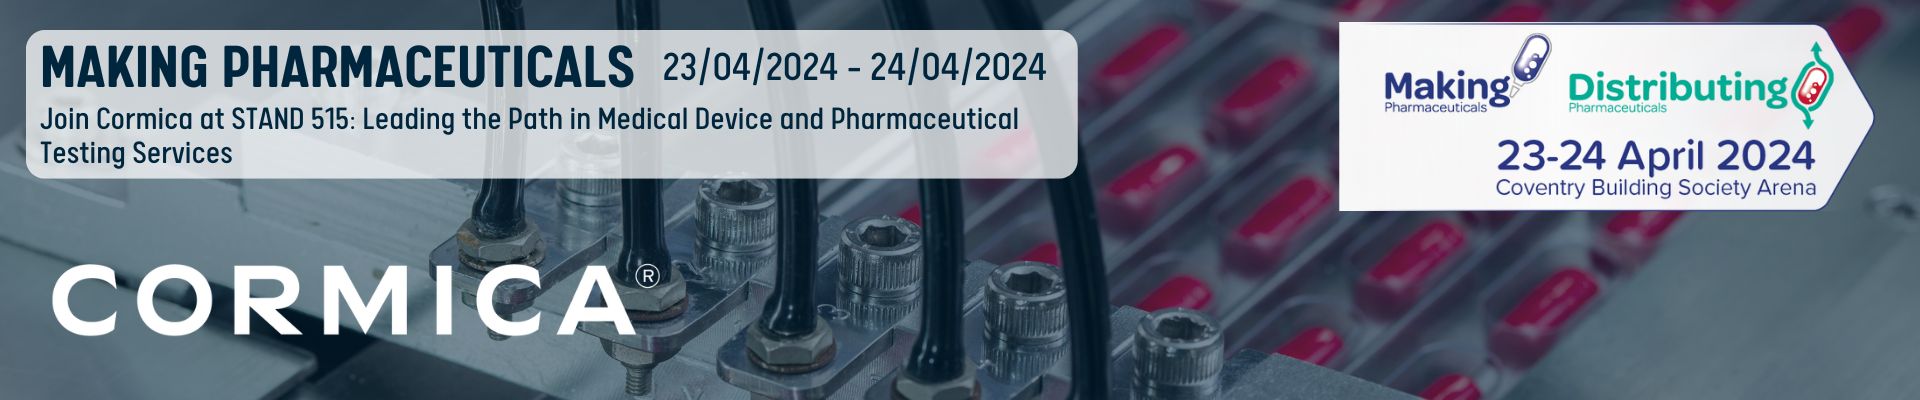 The image shows a close-up of a white pill making machine with several chutes and tubes. Text overlay on the image reads: "Making Pharmaceuticals 23/04/2024-24/04/2024 Making Distributing." There is also a Cormica logo.